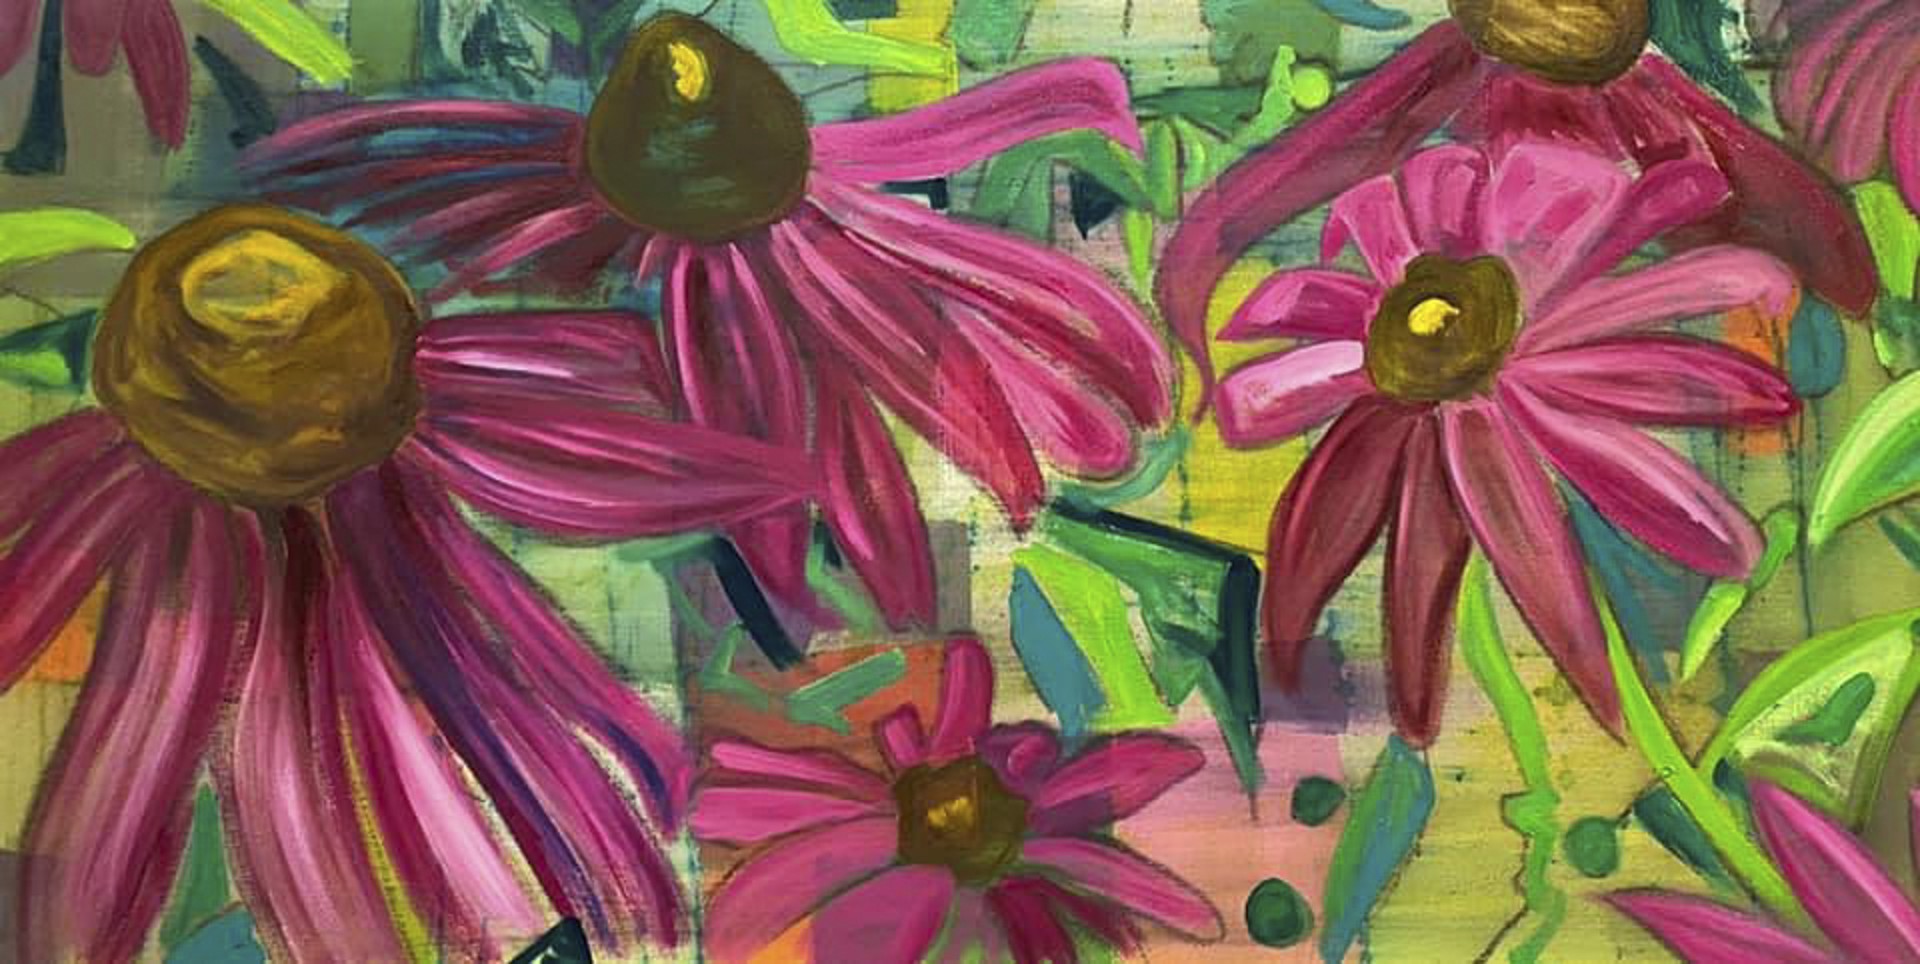 Coneflowers by Margaret Clifford-Bandstra